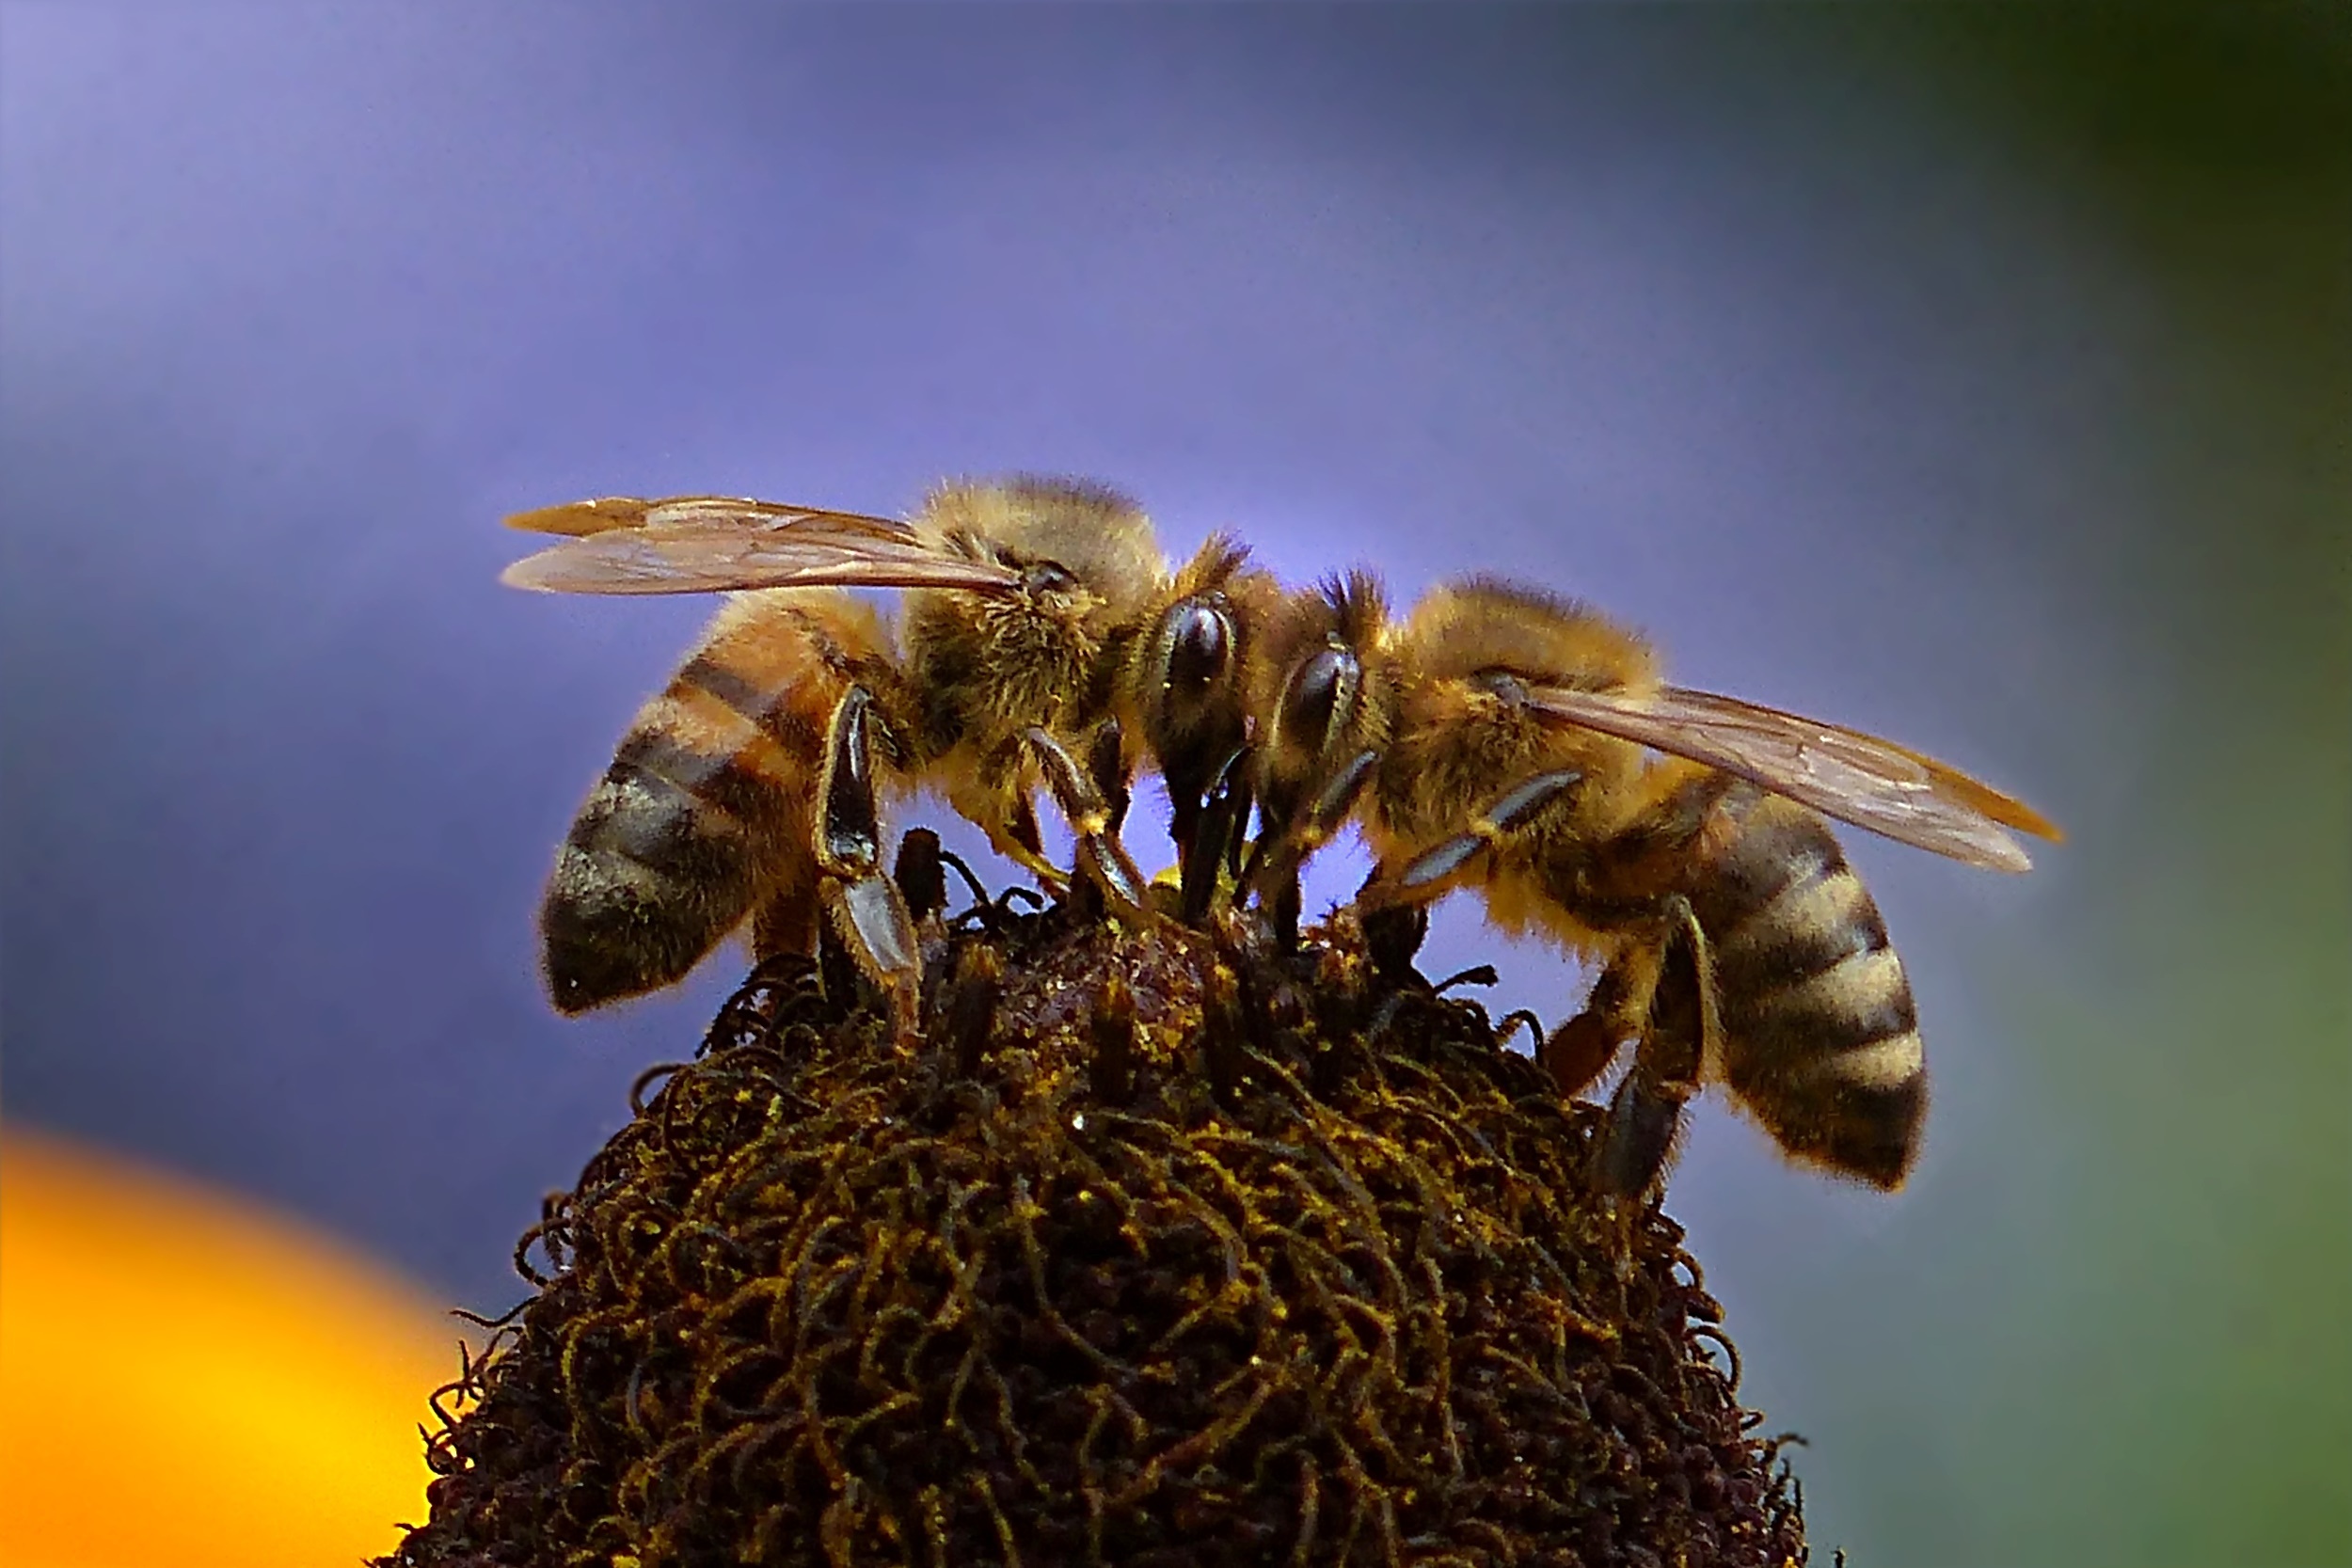 Bees work extremely harder than us